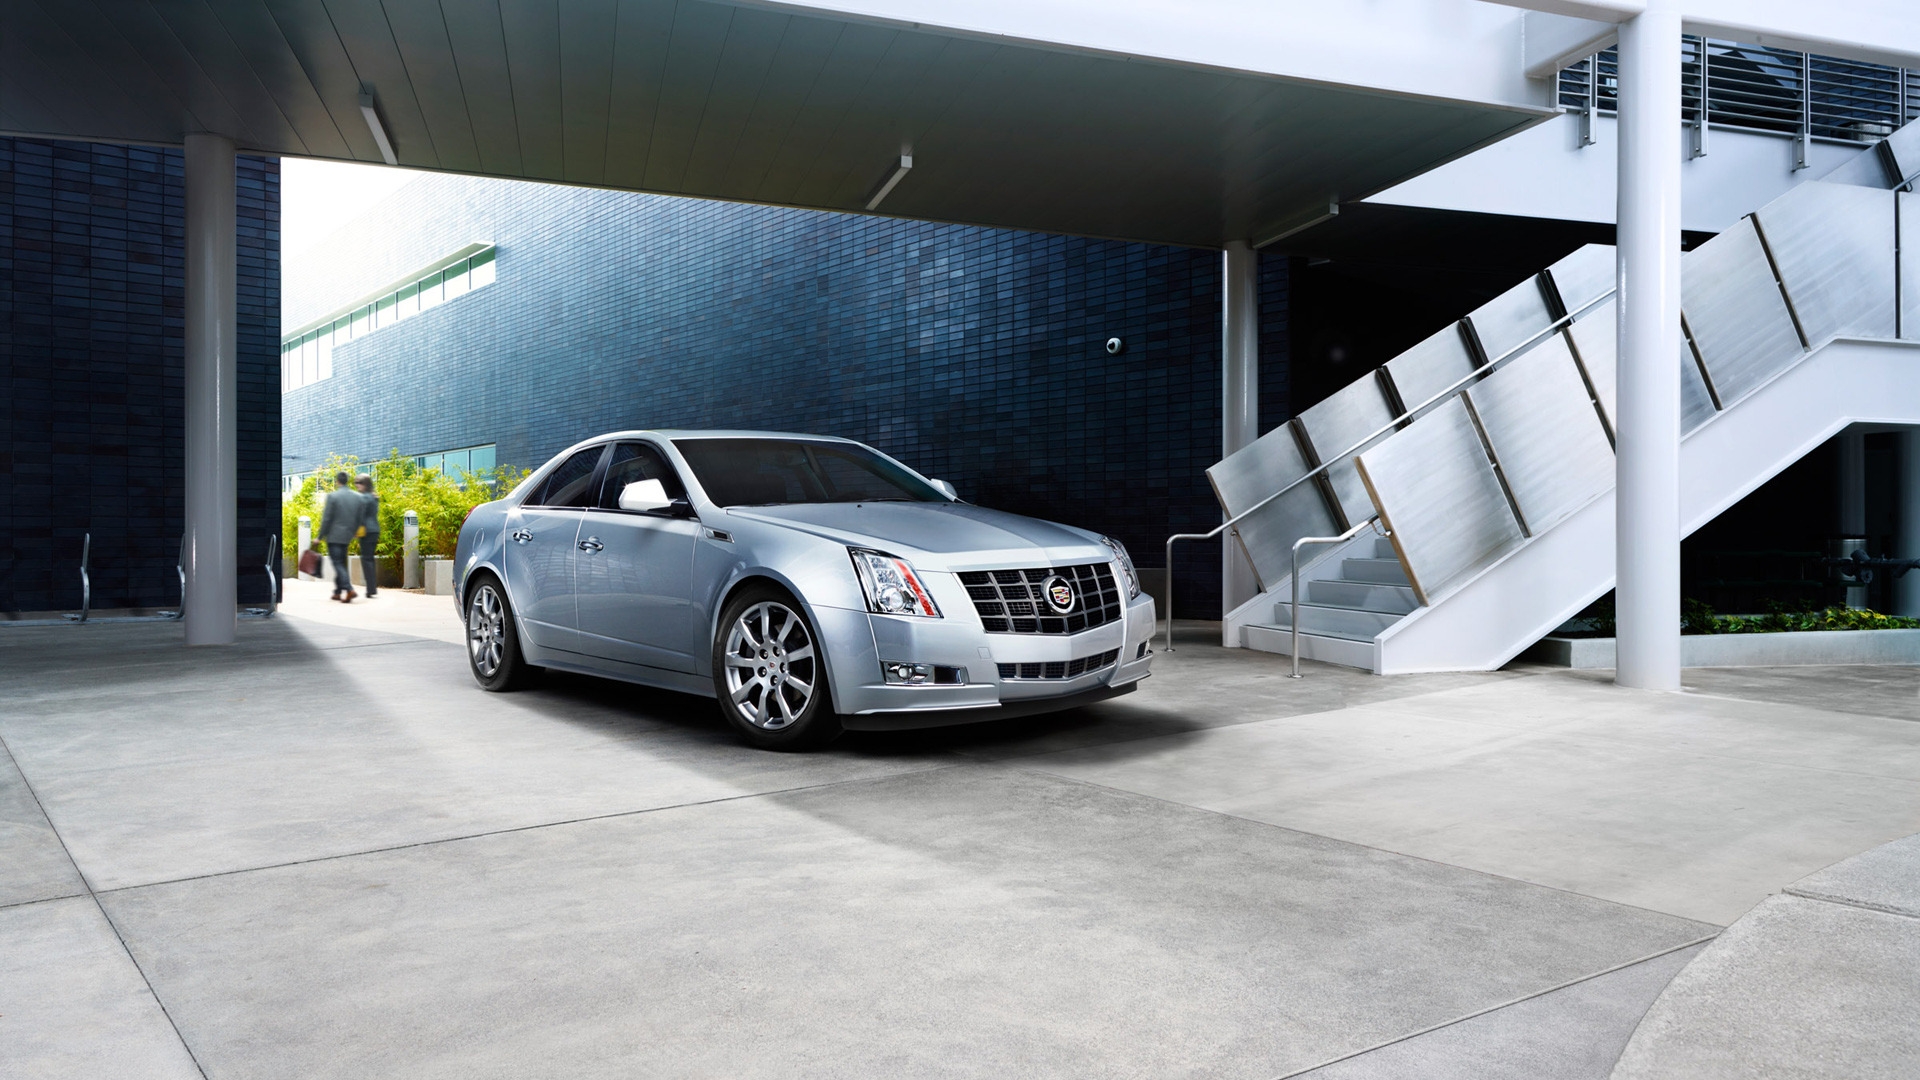 2012 Cadillac CTS Touring Edition for 1920 x 1080 HDTV 1080p resolution